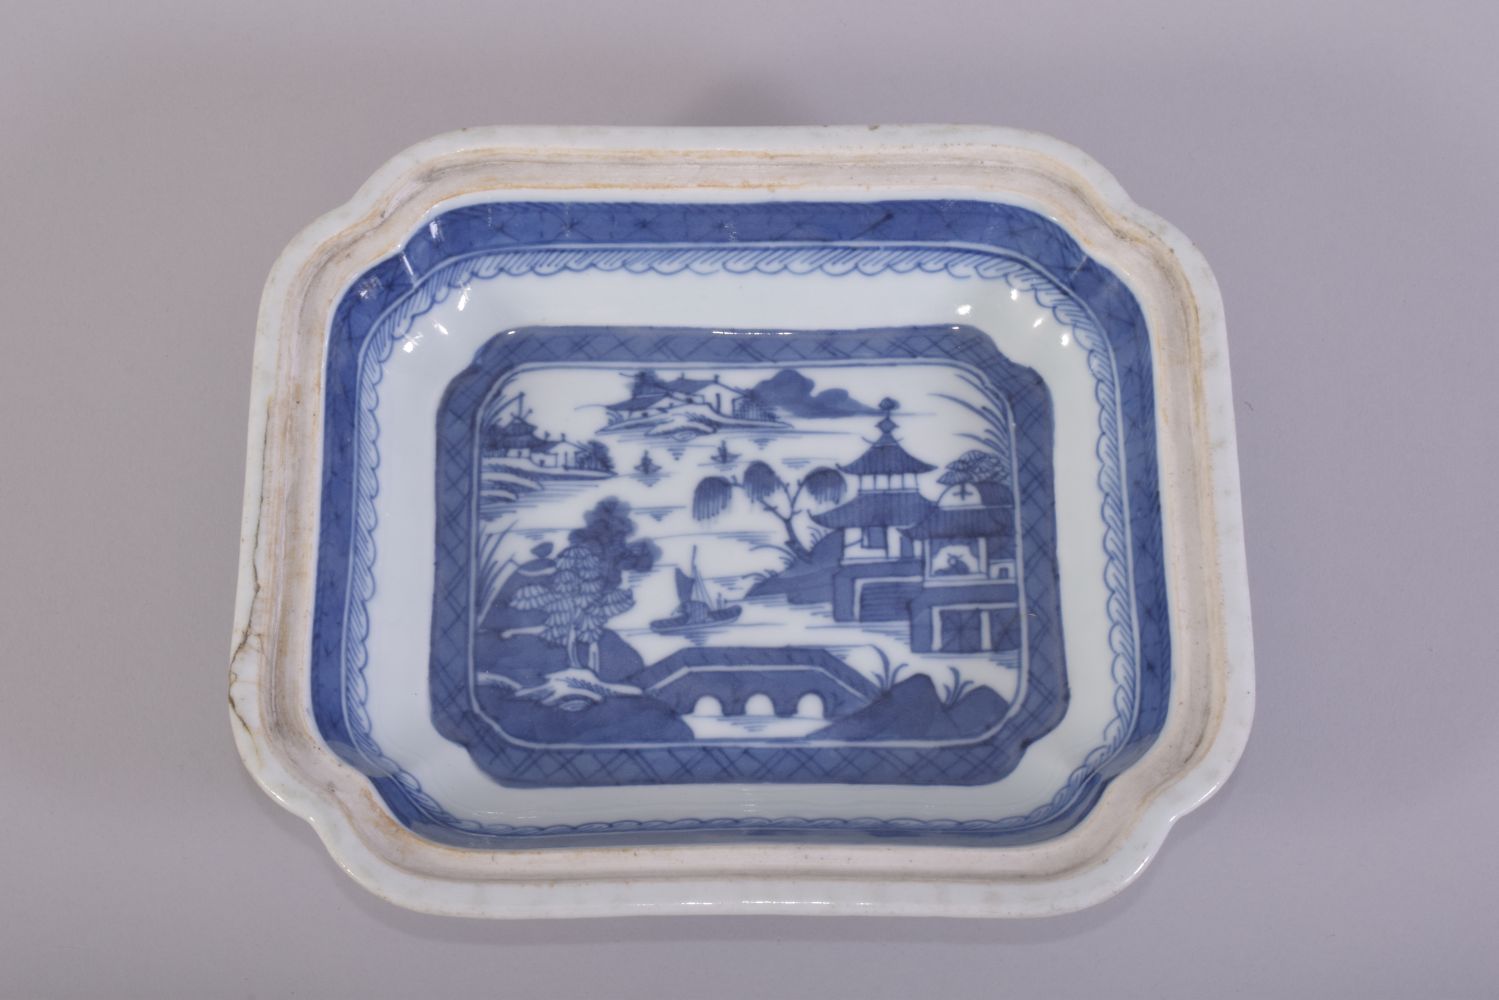 A CHINESE BLUE AND WHITE PORCELAIN TUREEN AND COVER, decorated with landscape scenes of buildings - Image 6 of 8